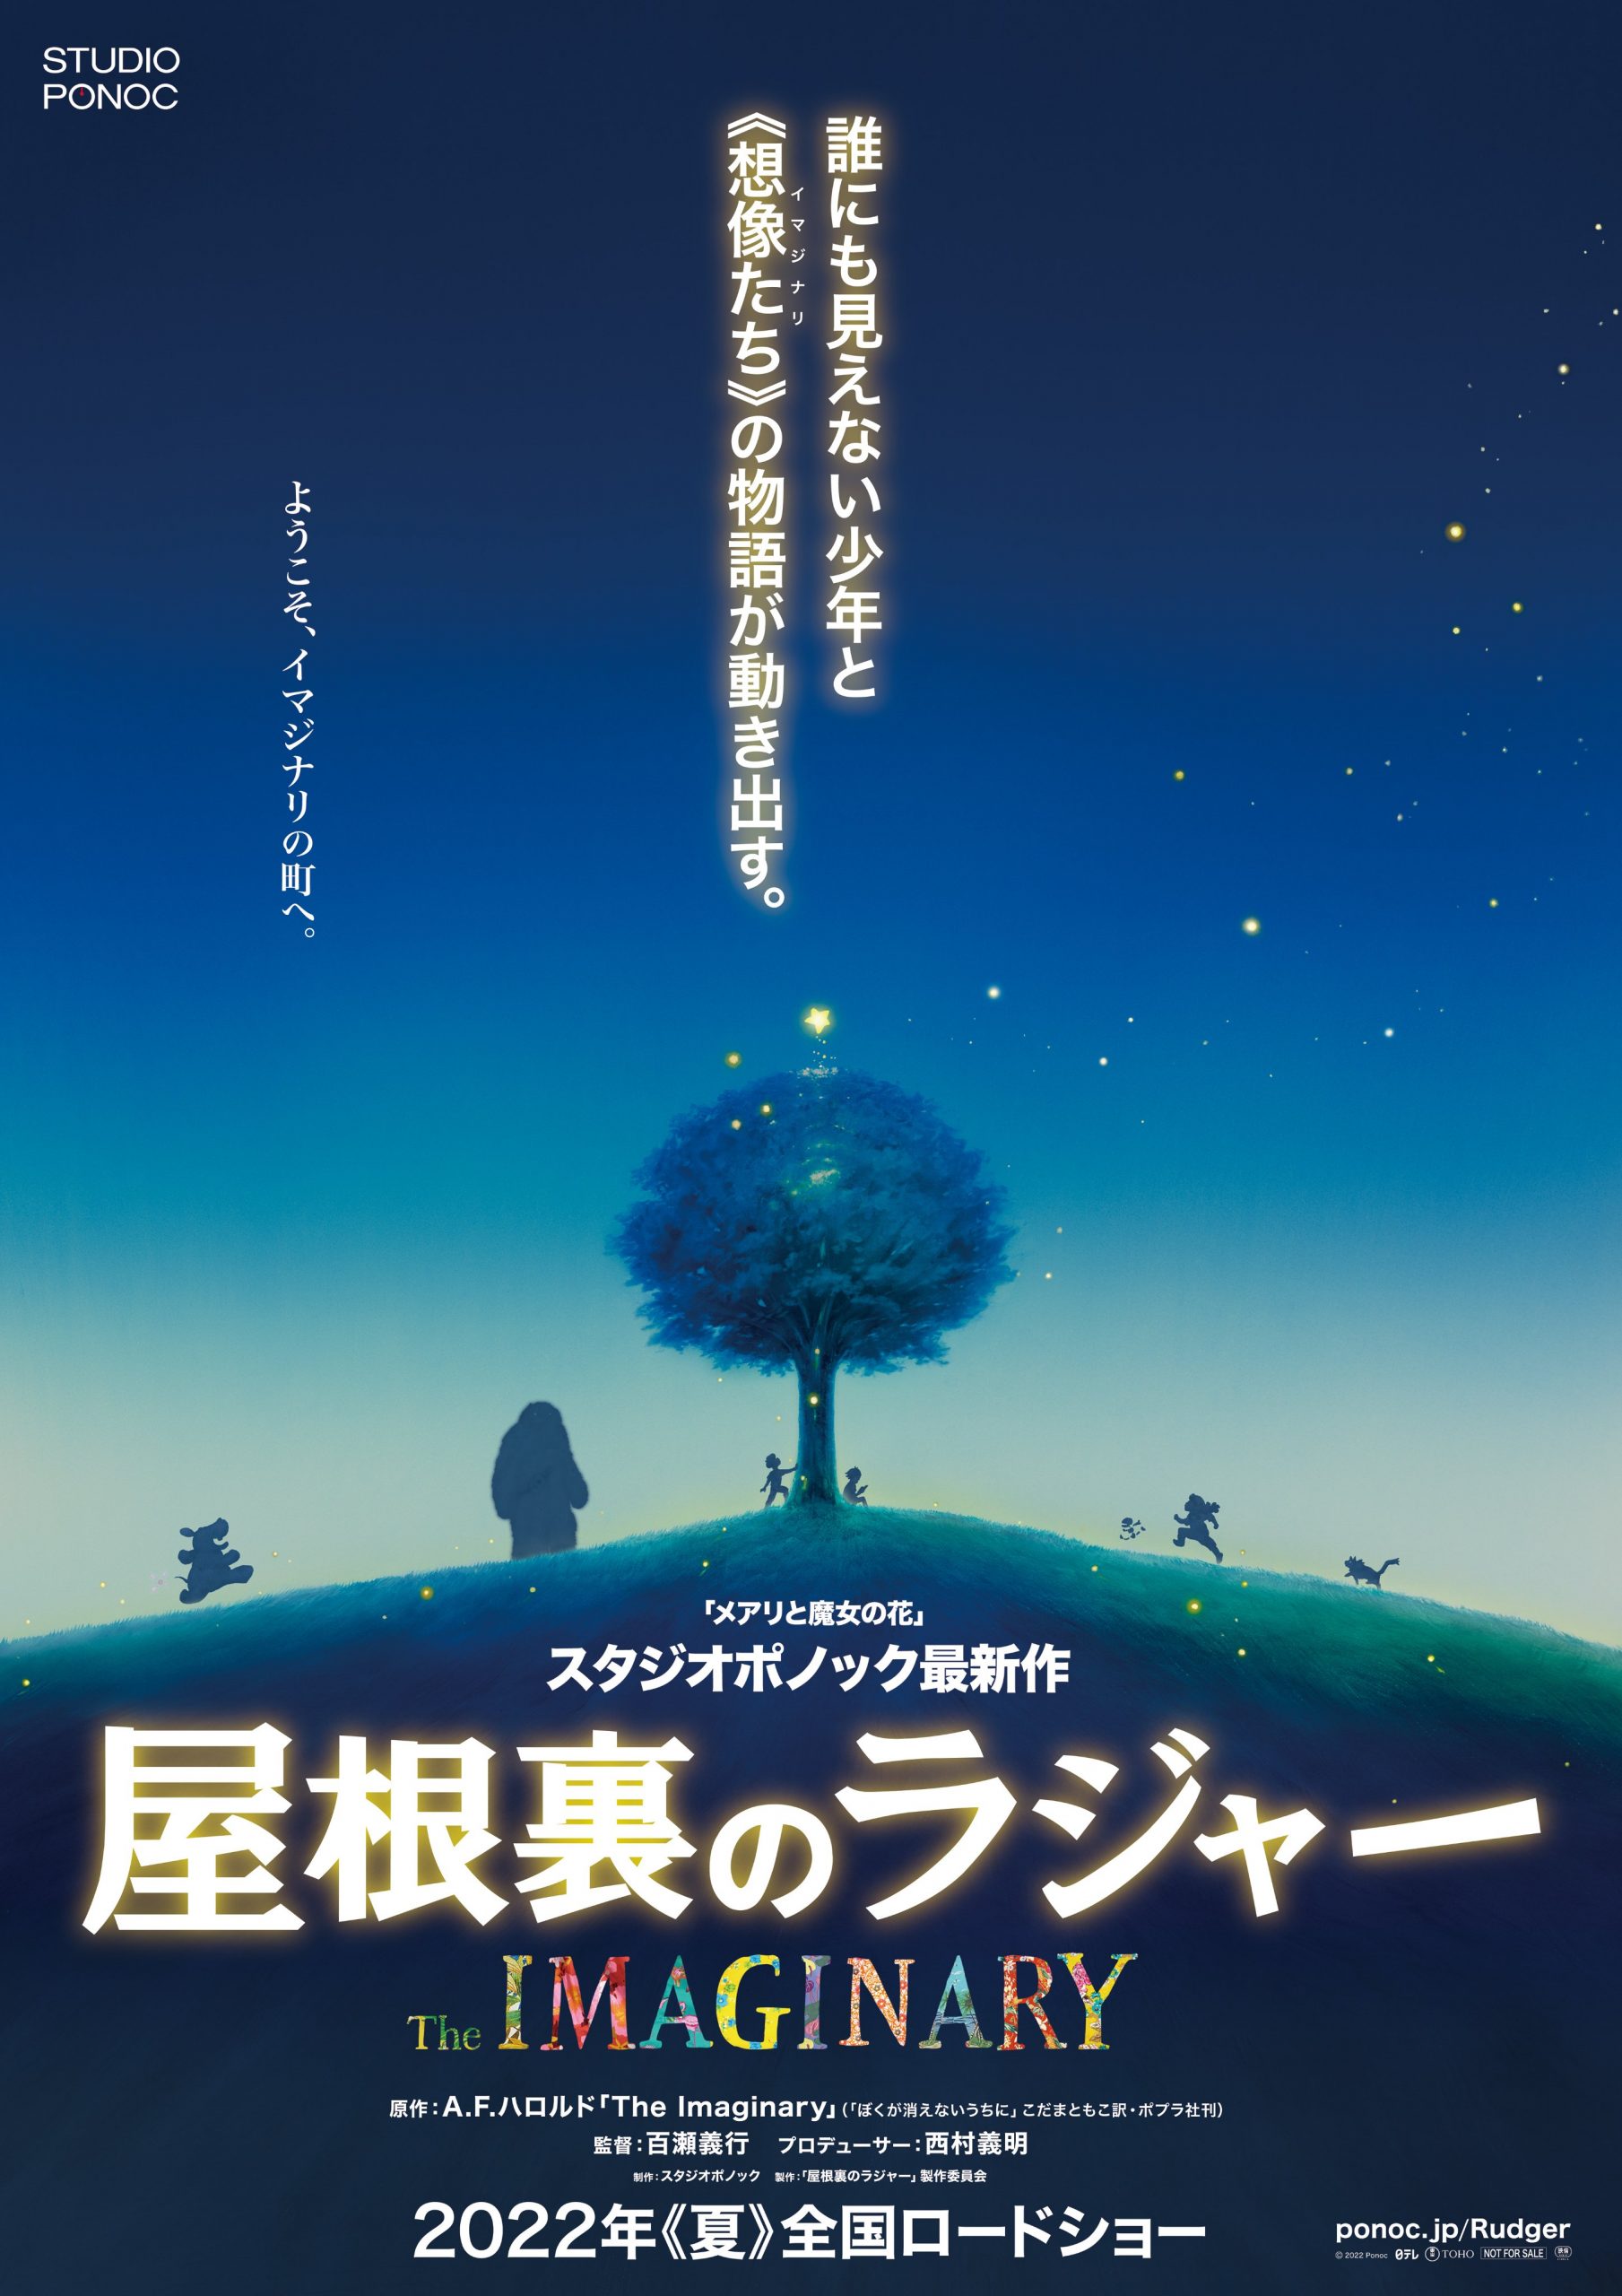 Yaneura-no-Rudger-The-Imaginary-KV-scaled Studio Ponoc's New Movie "Yaneura no Rudger" (The Imaginary) in Theaters this Summer!!